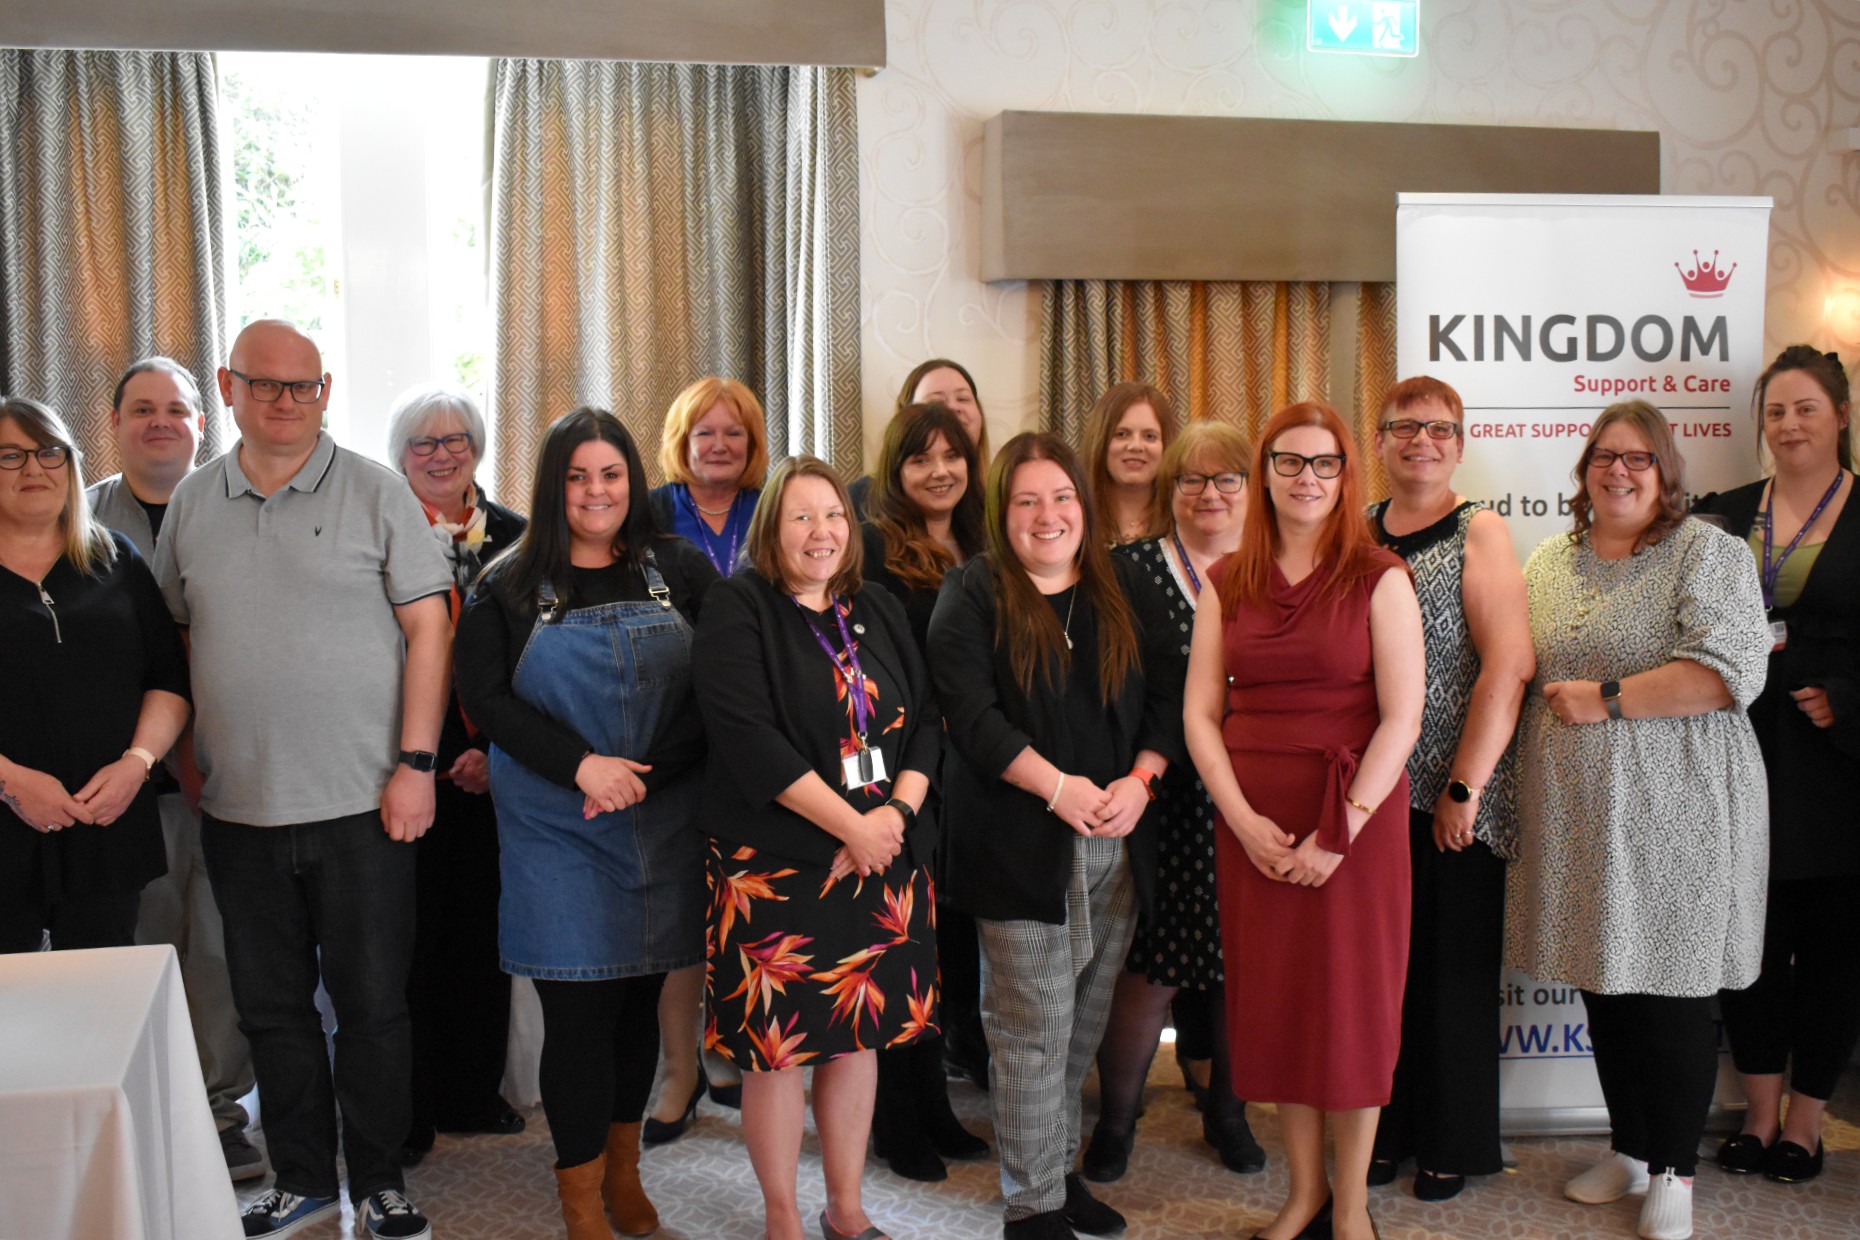 Kingdom Support & Care staff recognised at awards event